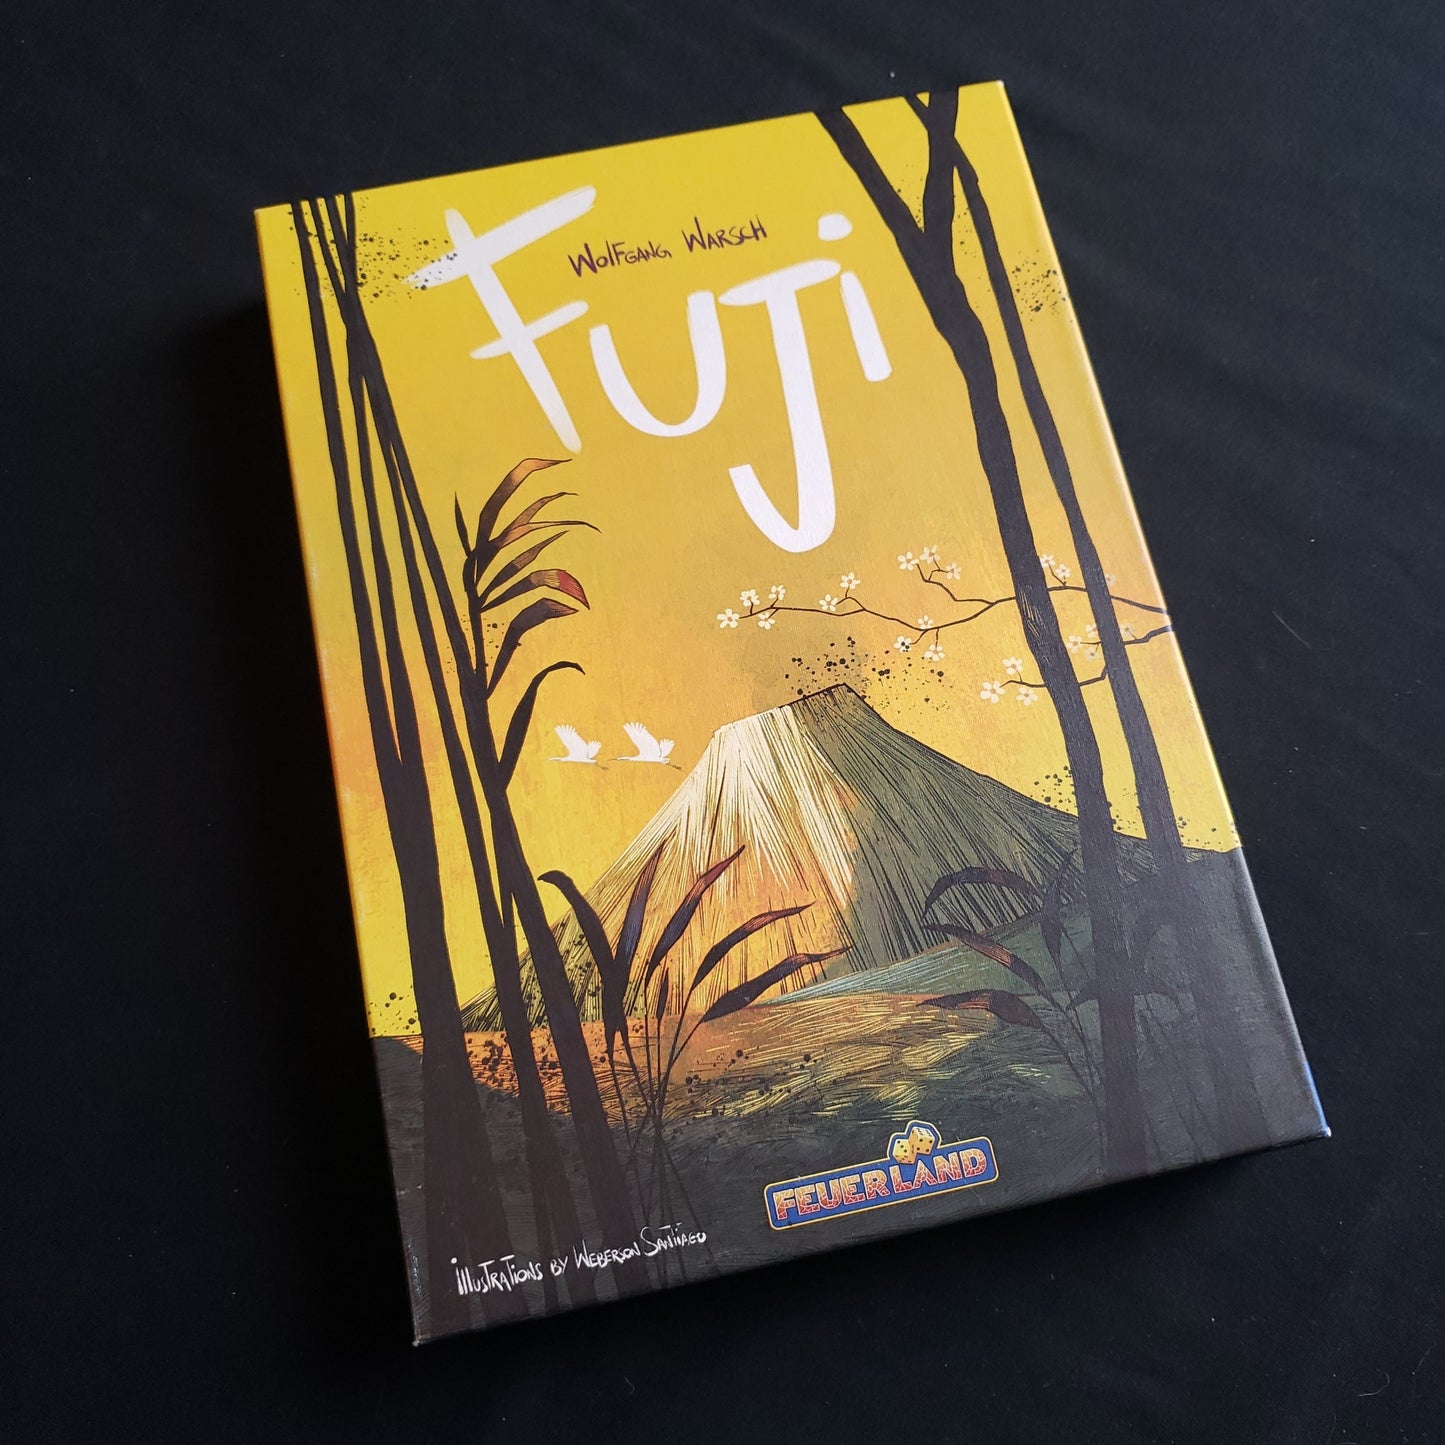 Image shows the front cover of the box of the Fuji board game